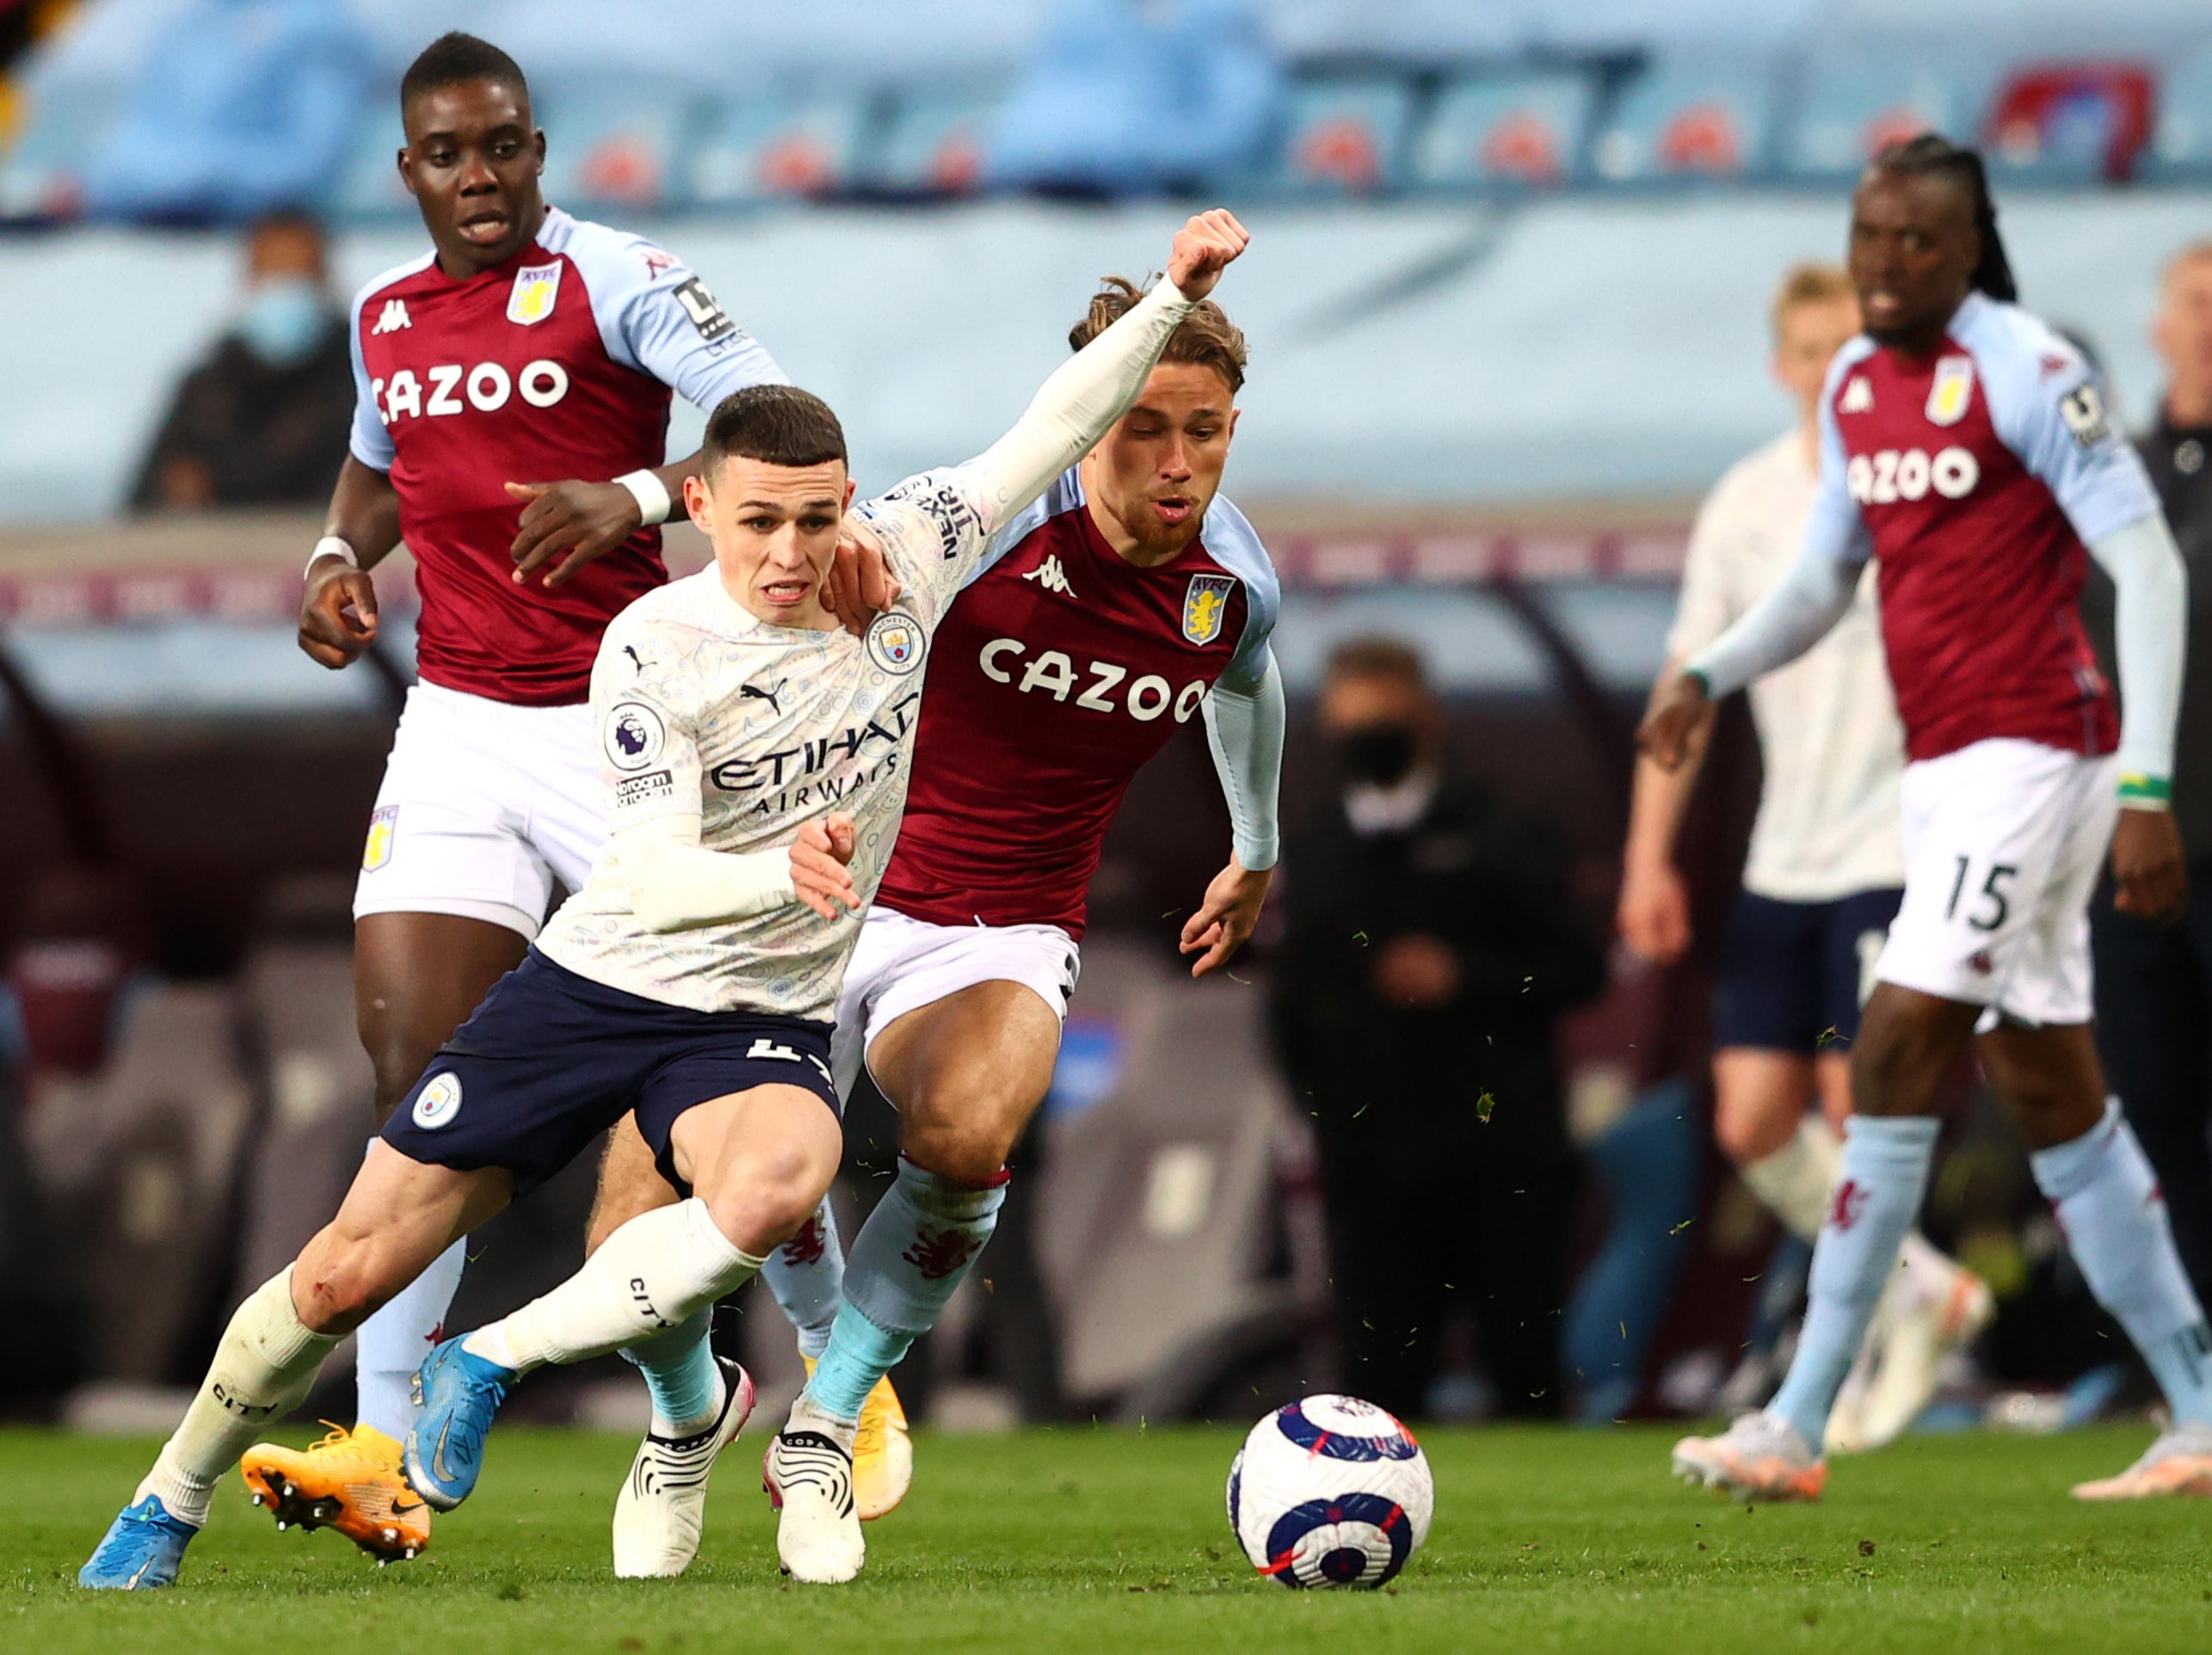 Midfielder Phil Foden on the ball for Manchester City